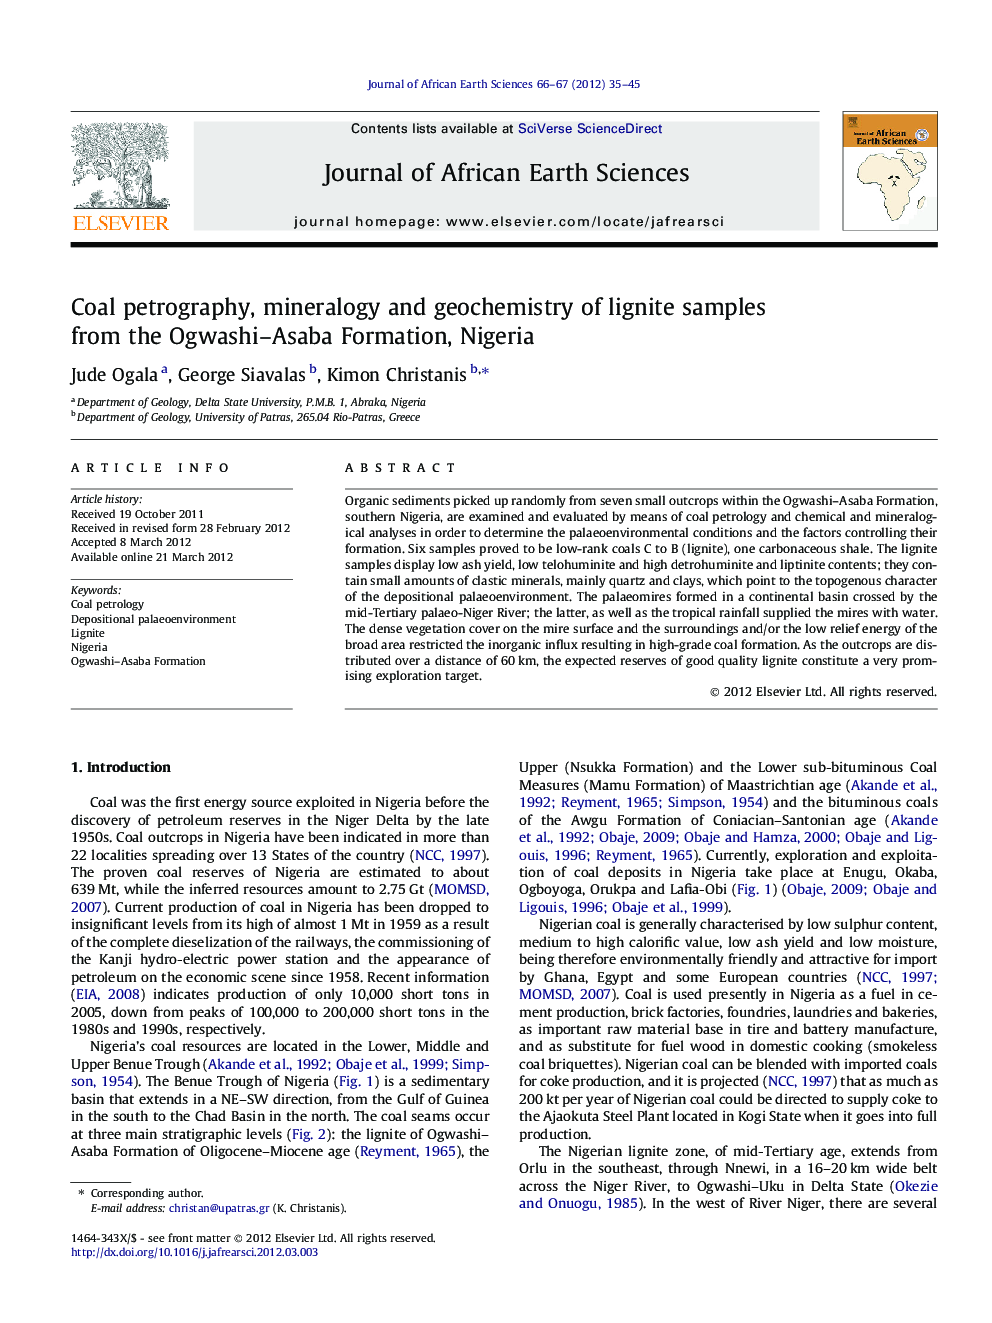 Coal petrography, mineralogy and geochemistry of lignite samples from the Ogwashi–Asaba Formation, Nigeria